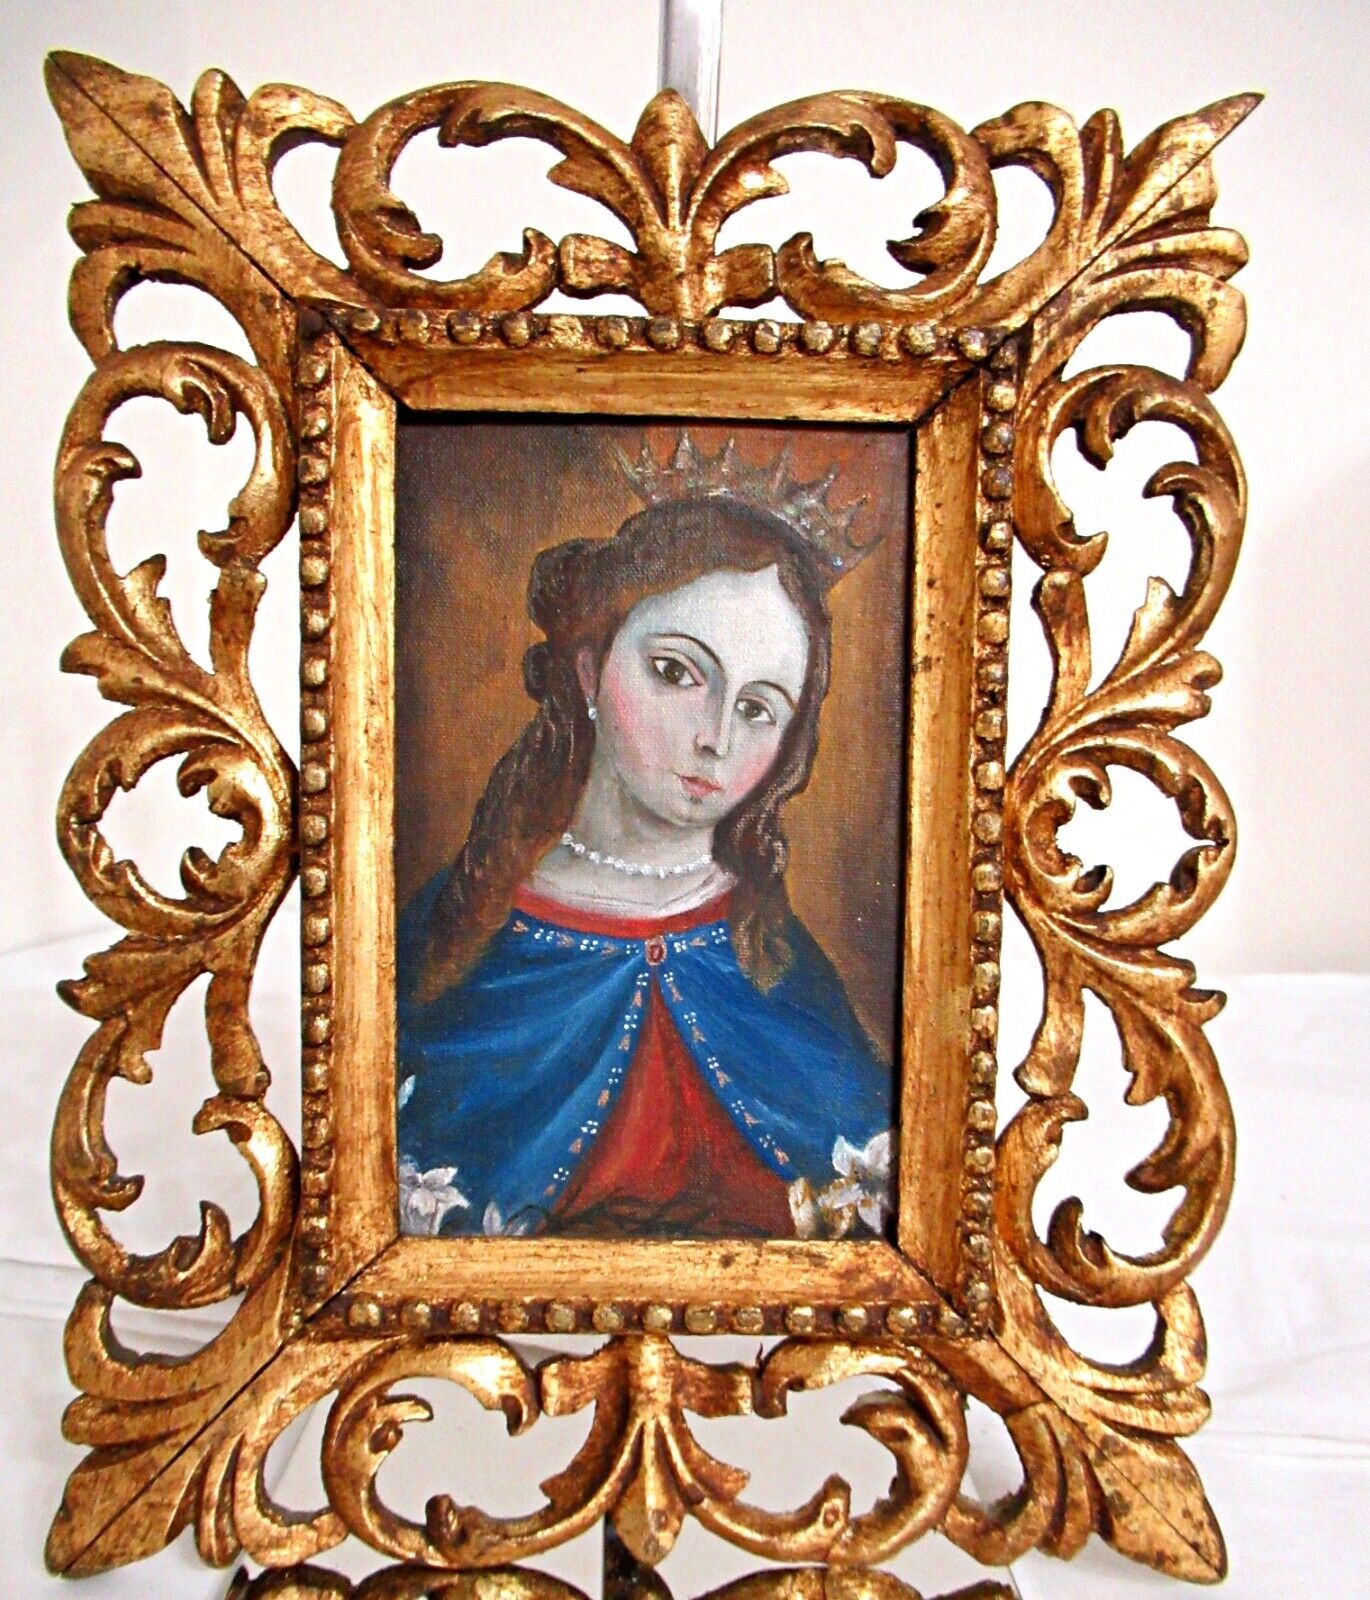 ANTIQUE MEXICAN BAROQUE STYLE PAINTING VIRGIN MARY GILDED FRAME - ARTIST SIGNED